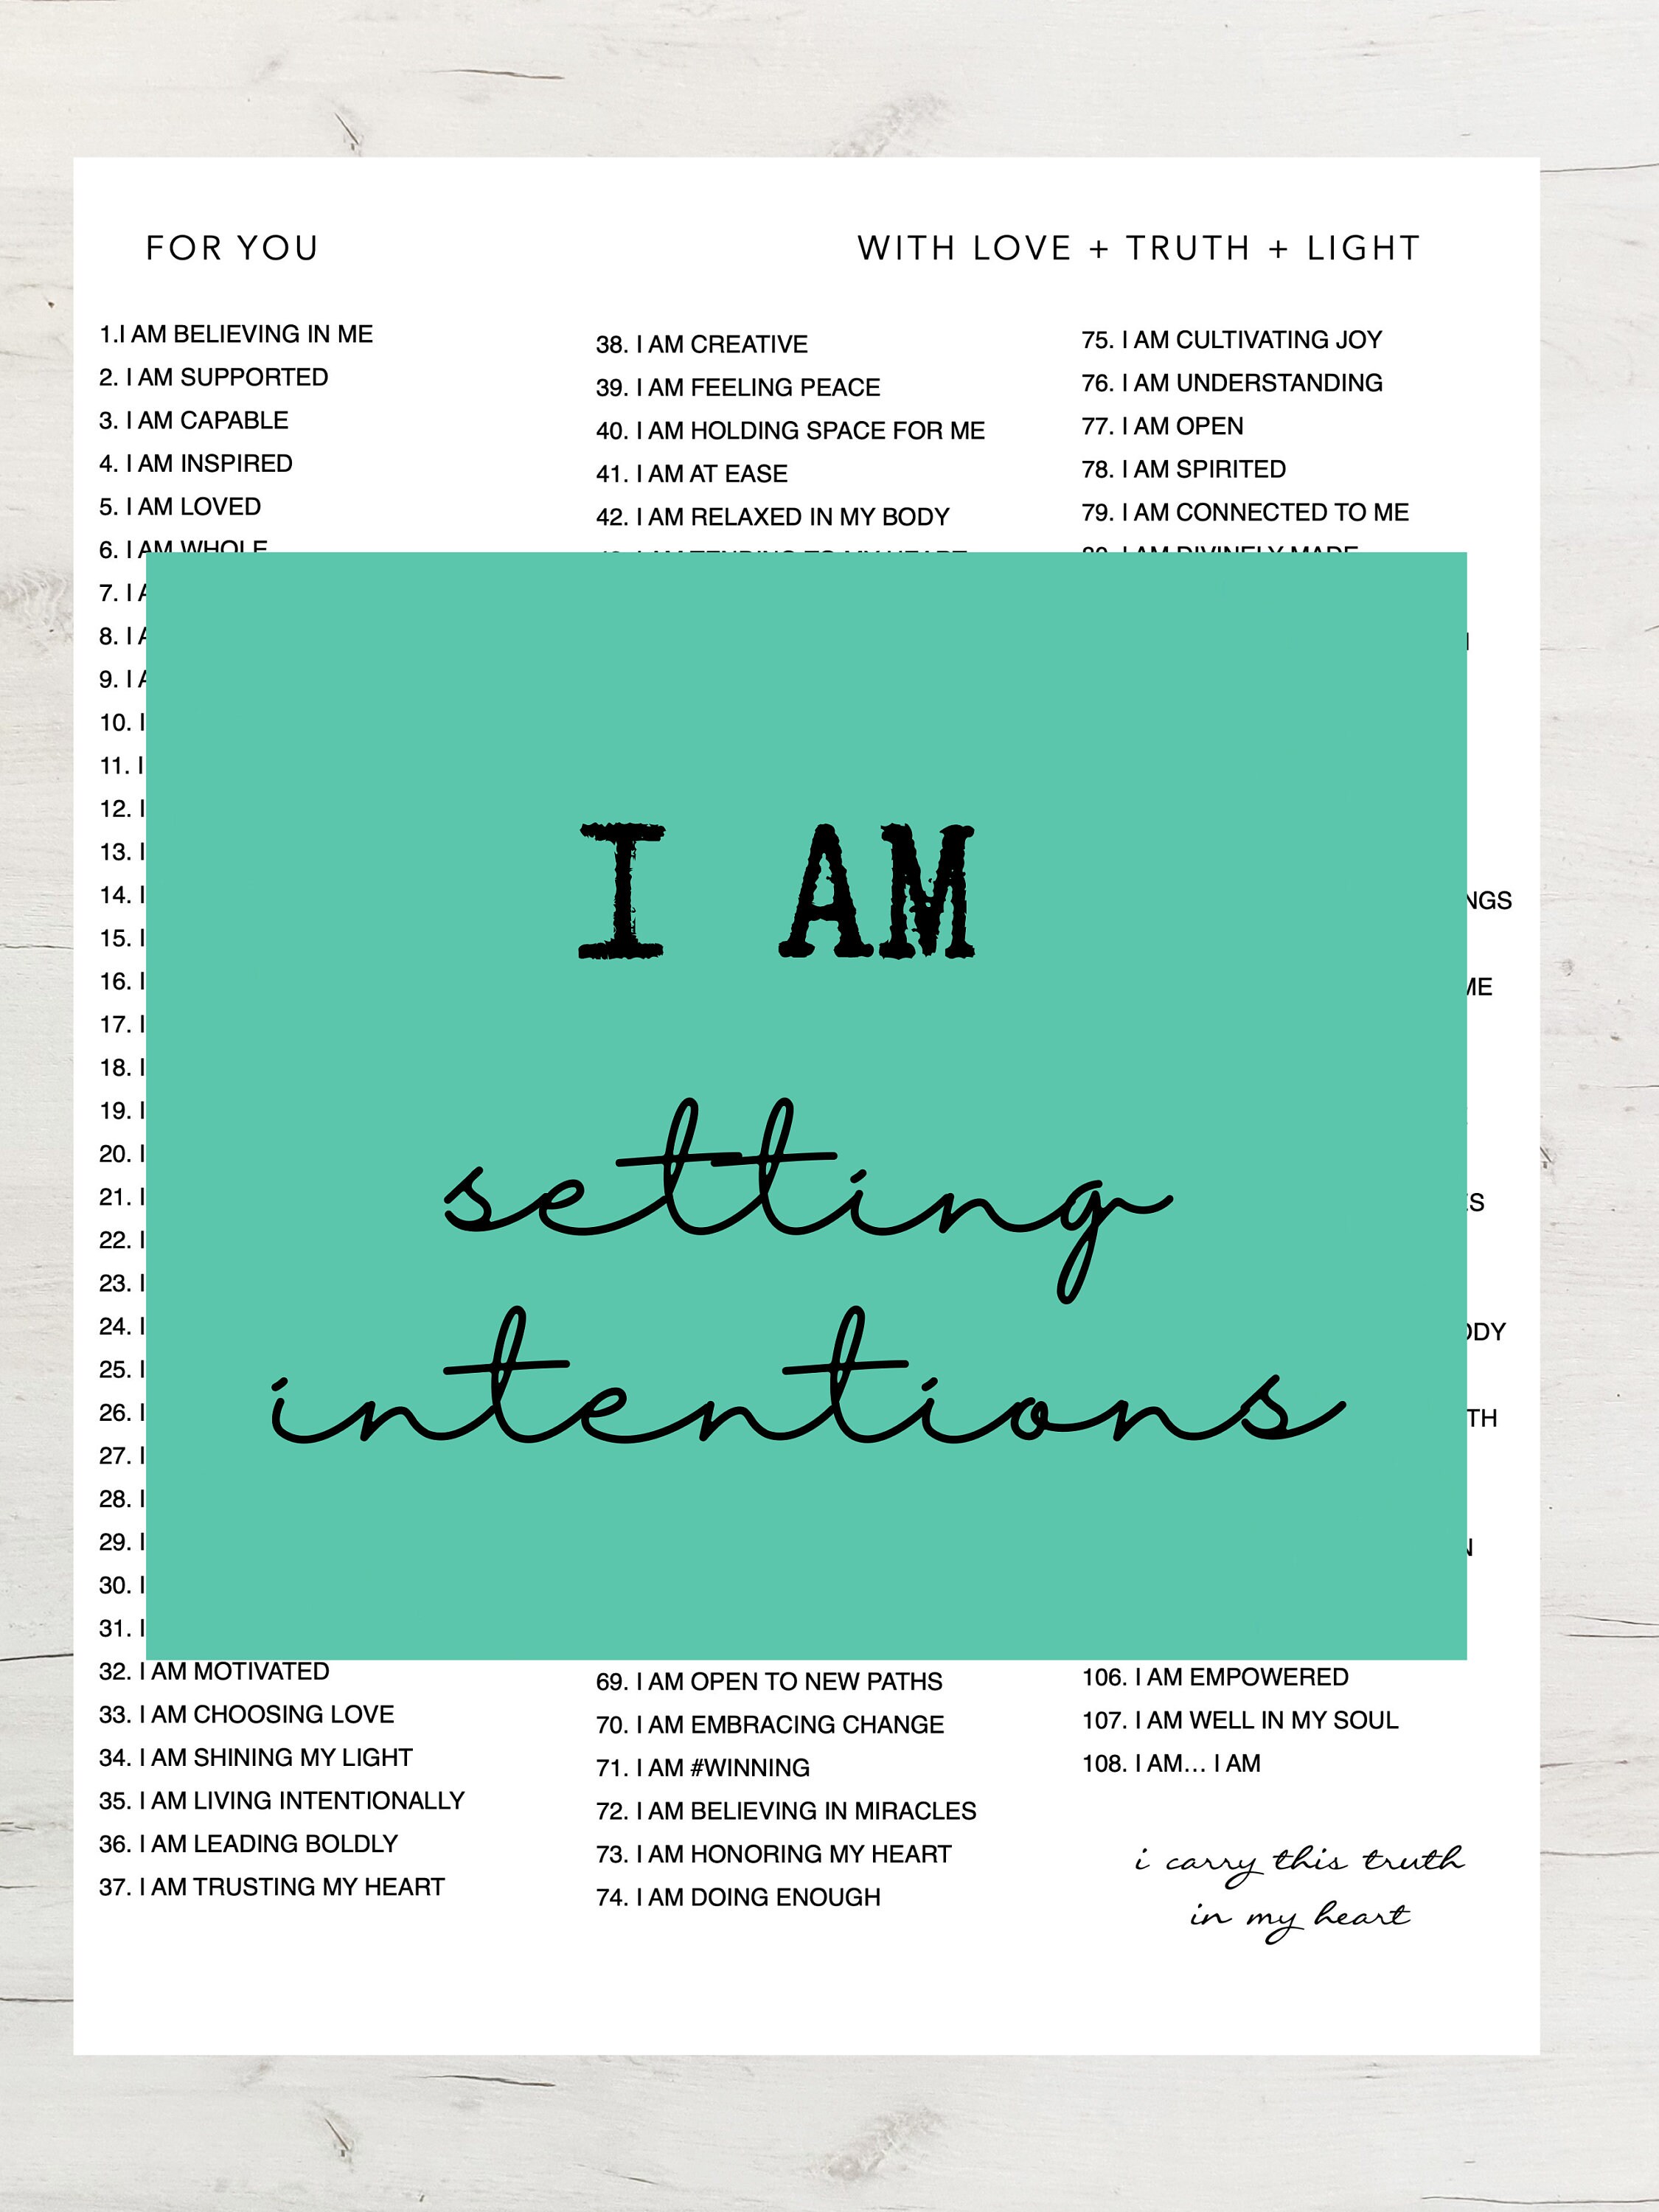 Believe in Yourself L 108 I AM Affirmations Guide L Instant 